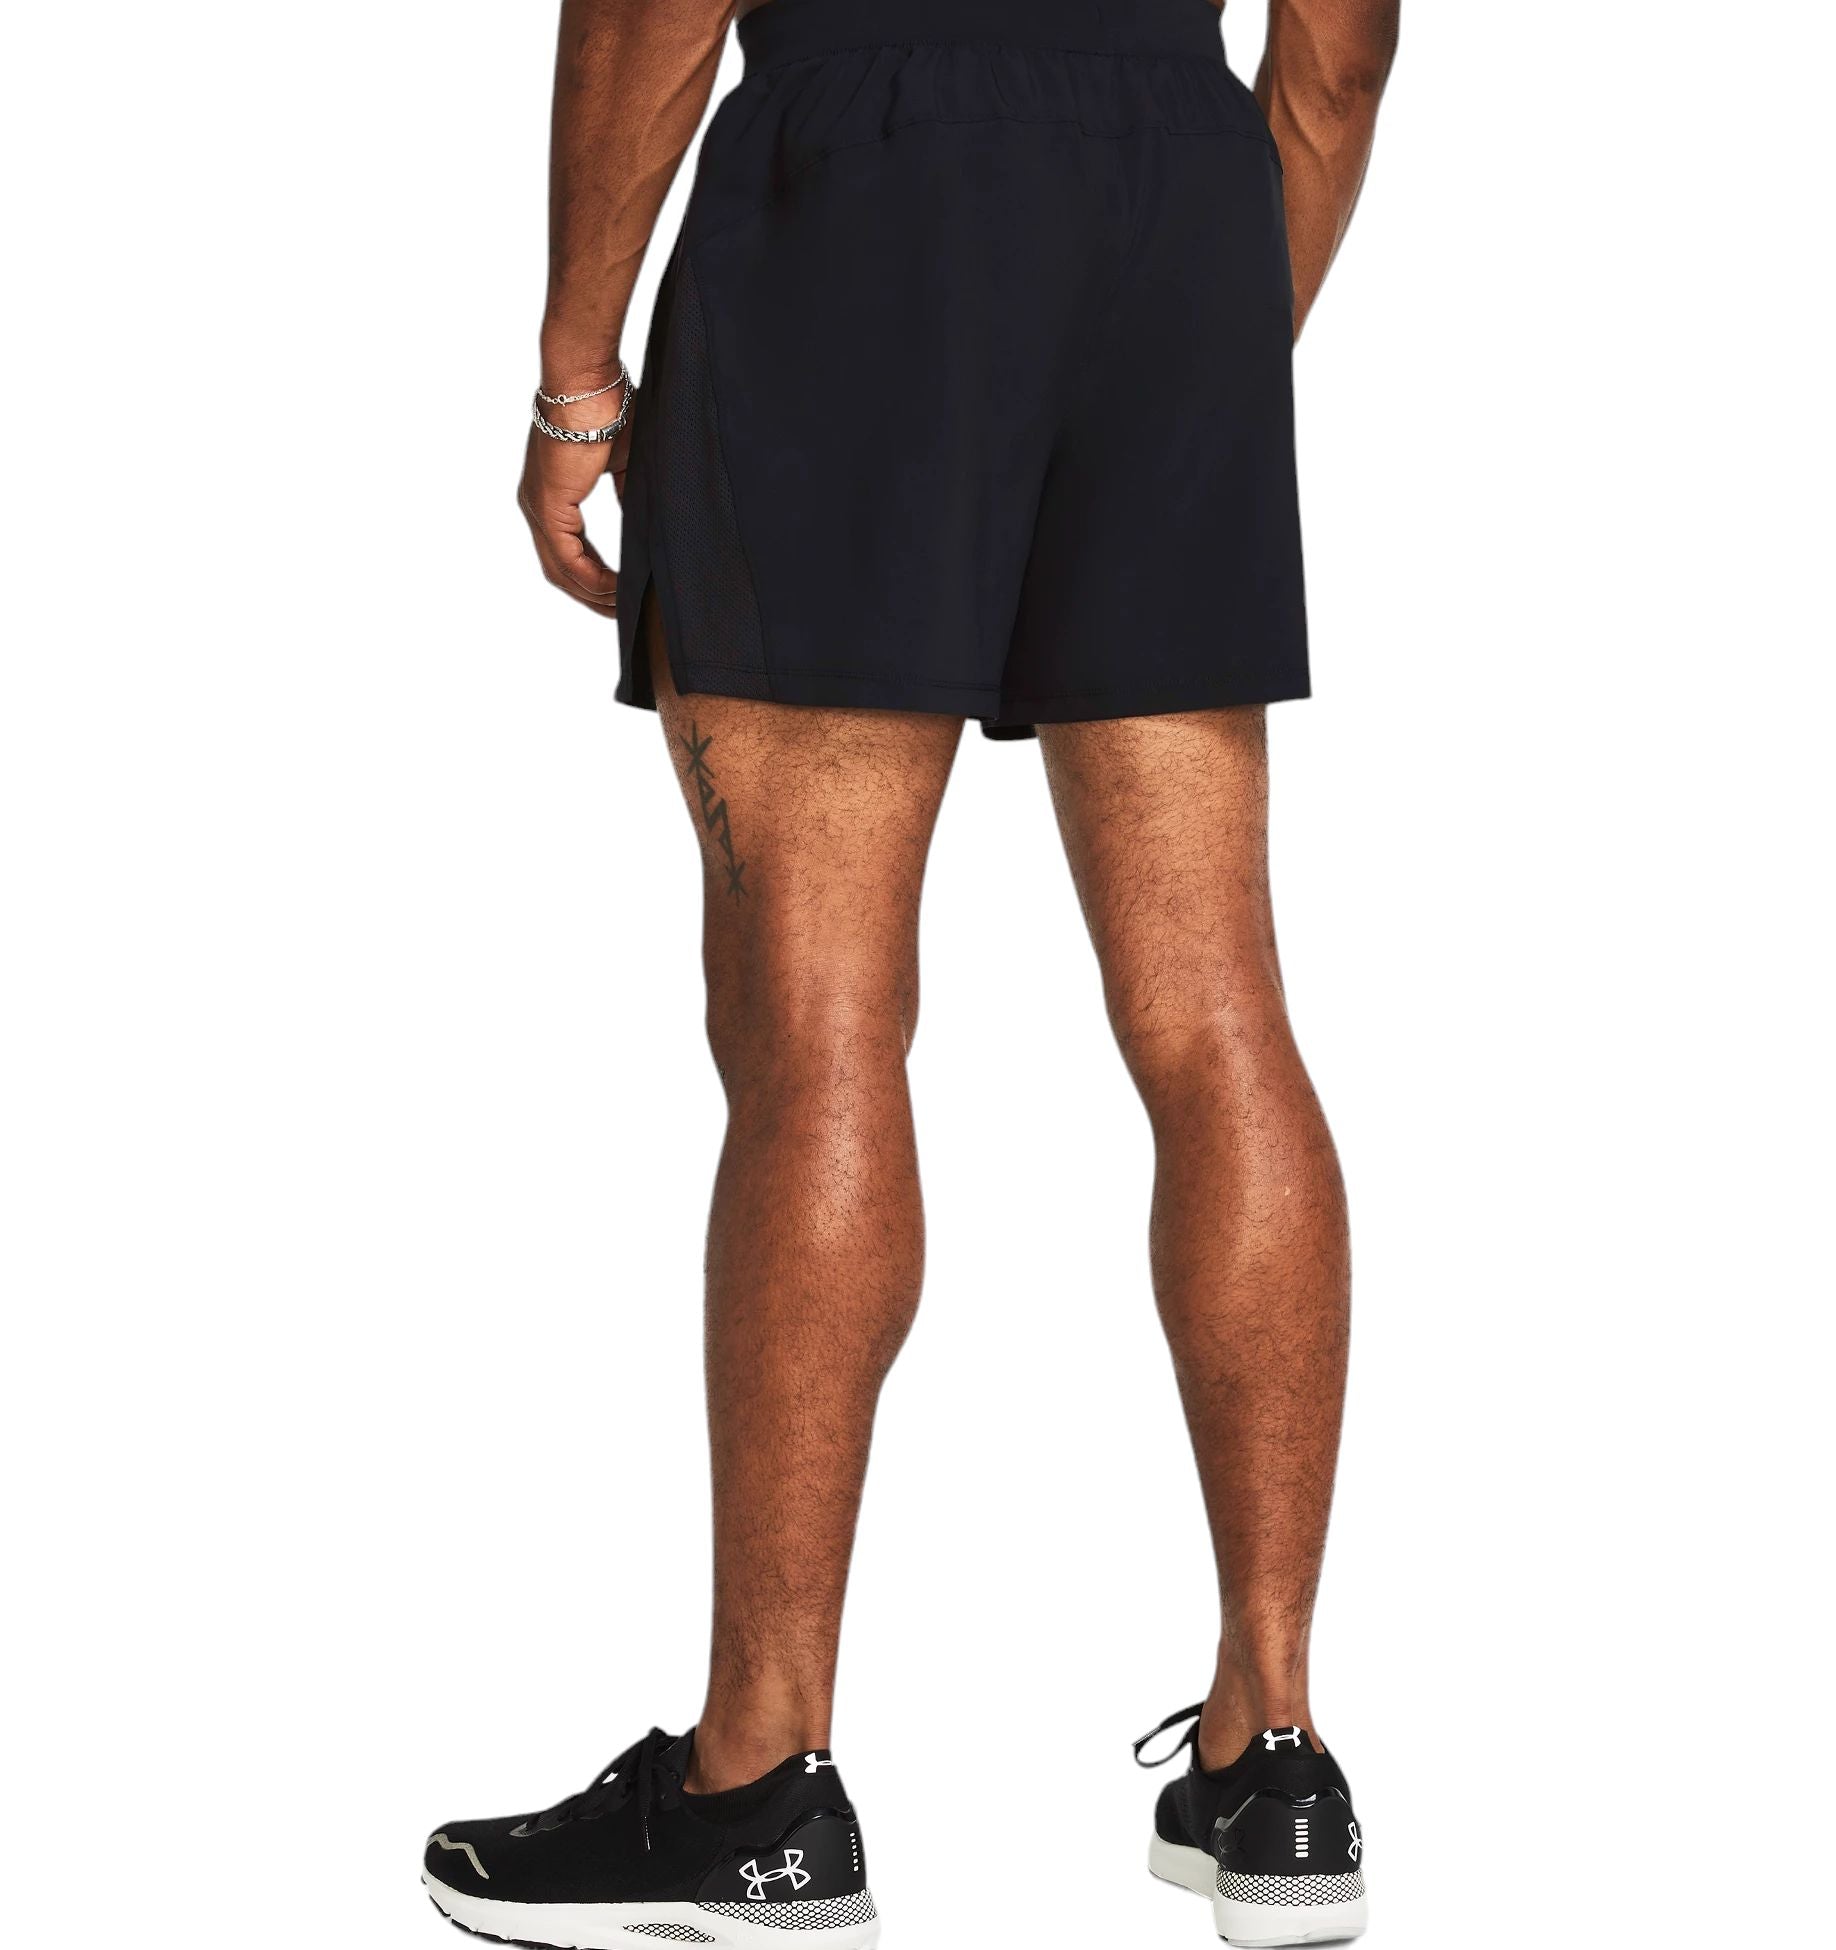 Men's Launch Unlined 5IN Shorts Black/Reflective 